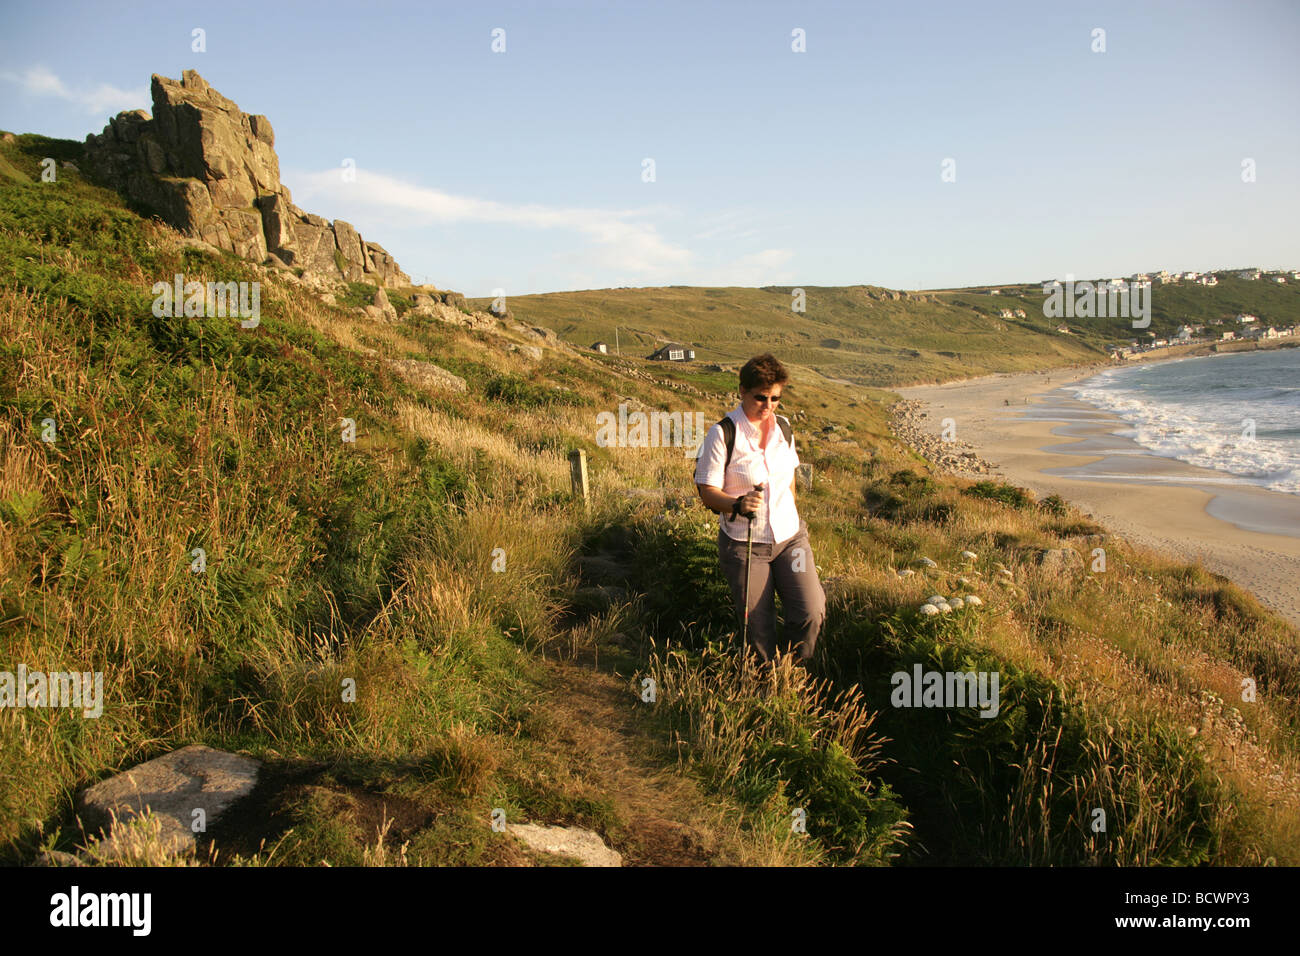 Area of Sennen, England. Lady walking alone along the coastal path with Sennen Cove in the background. Stock Photo